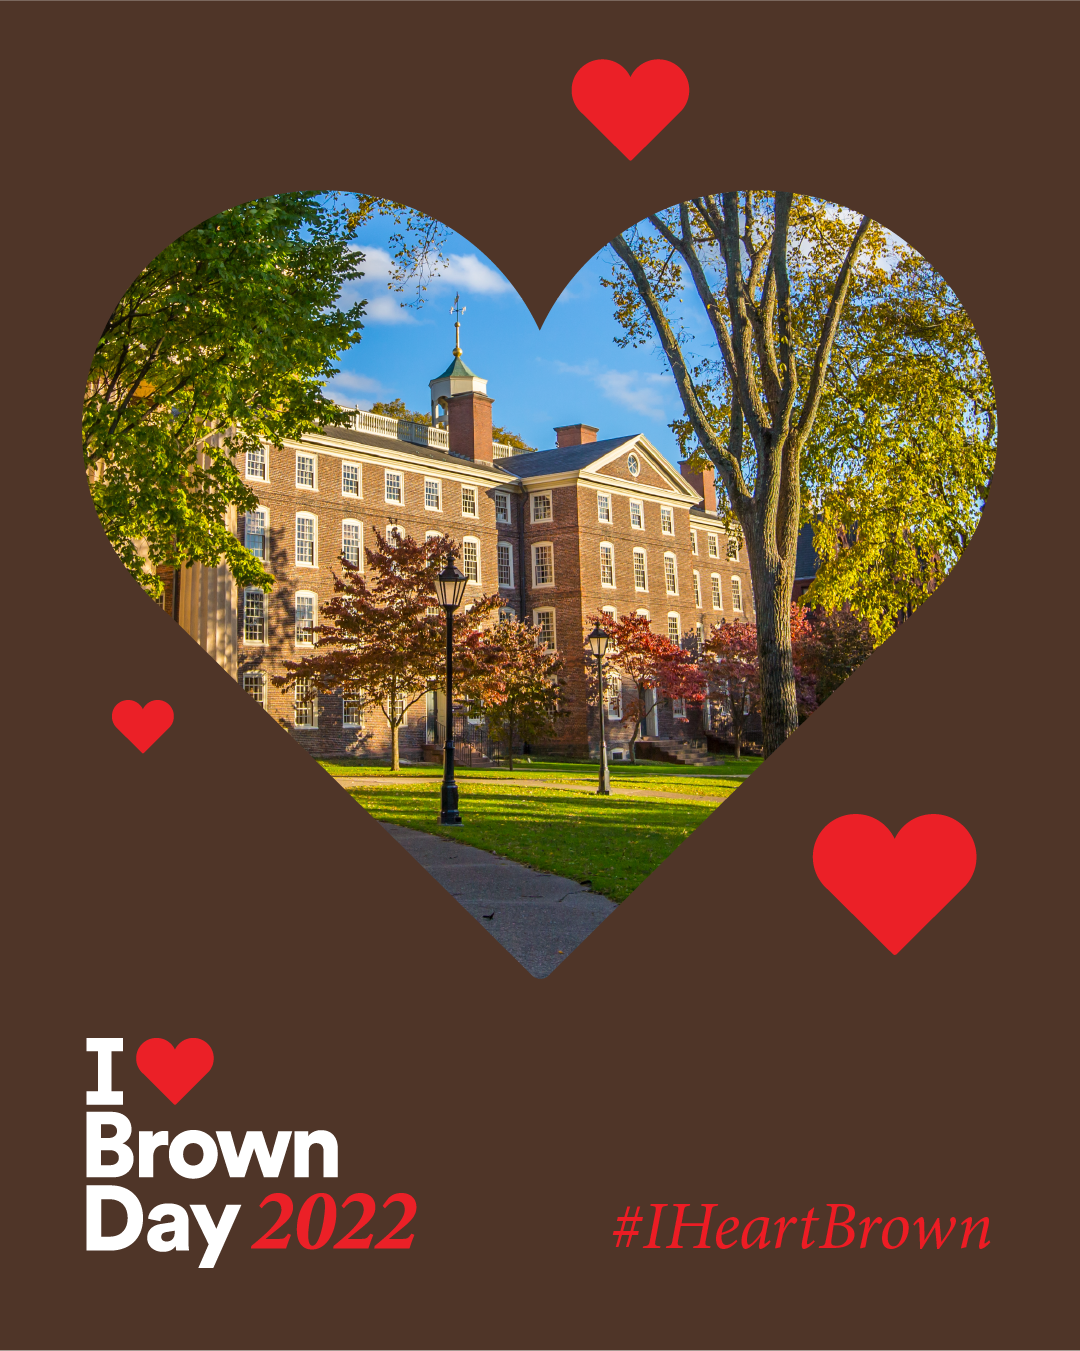 Photo of University Hall cut out in the shape of a heard on a brown background with the I Heart Brown Day logo in the bottom left corner